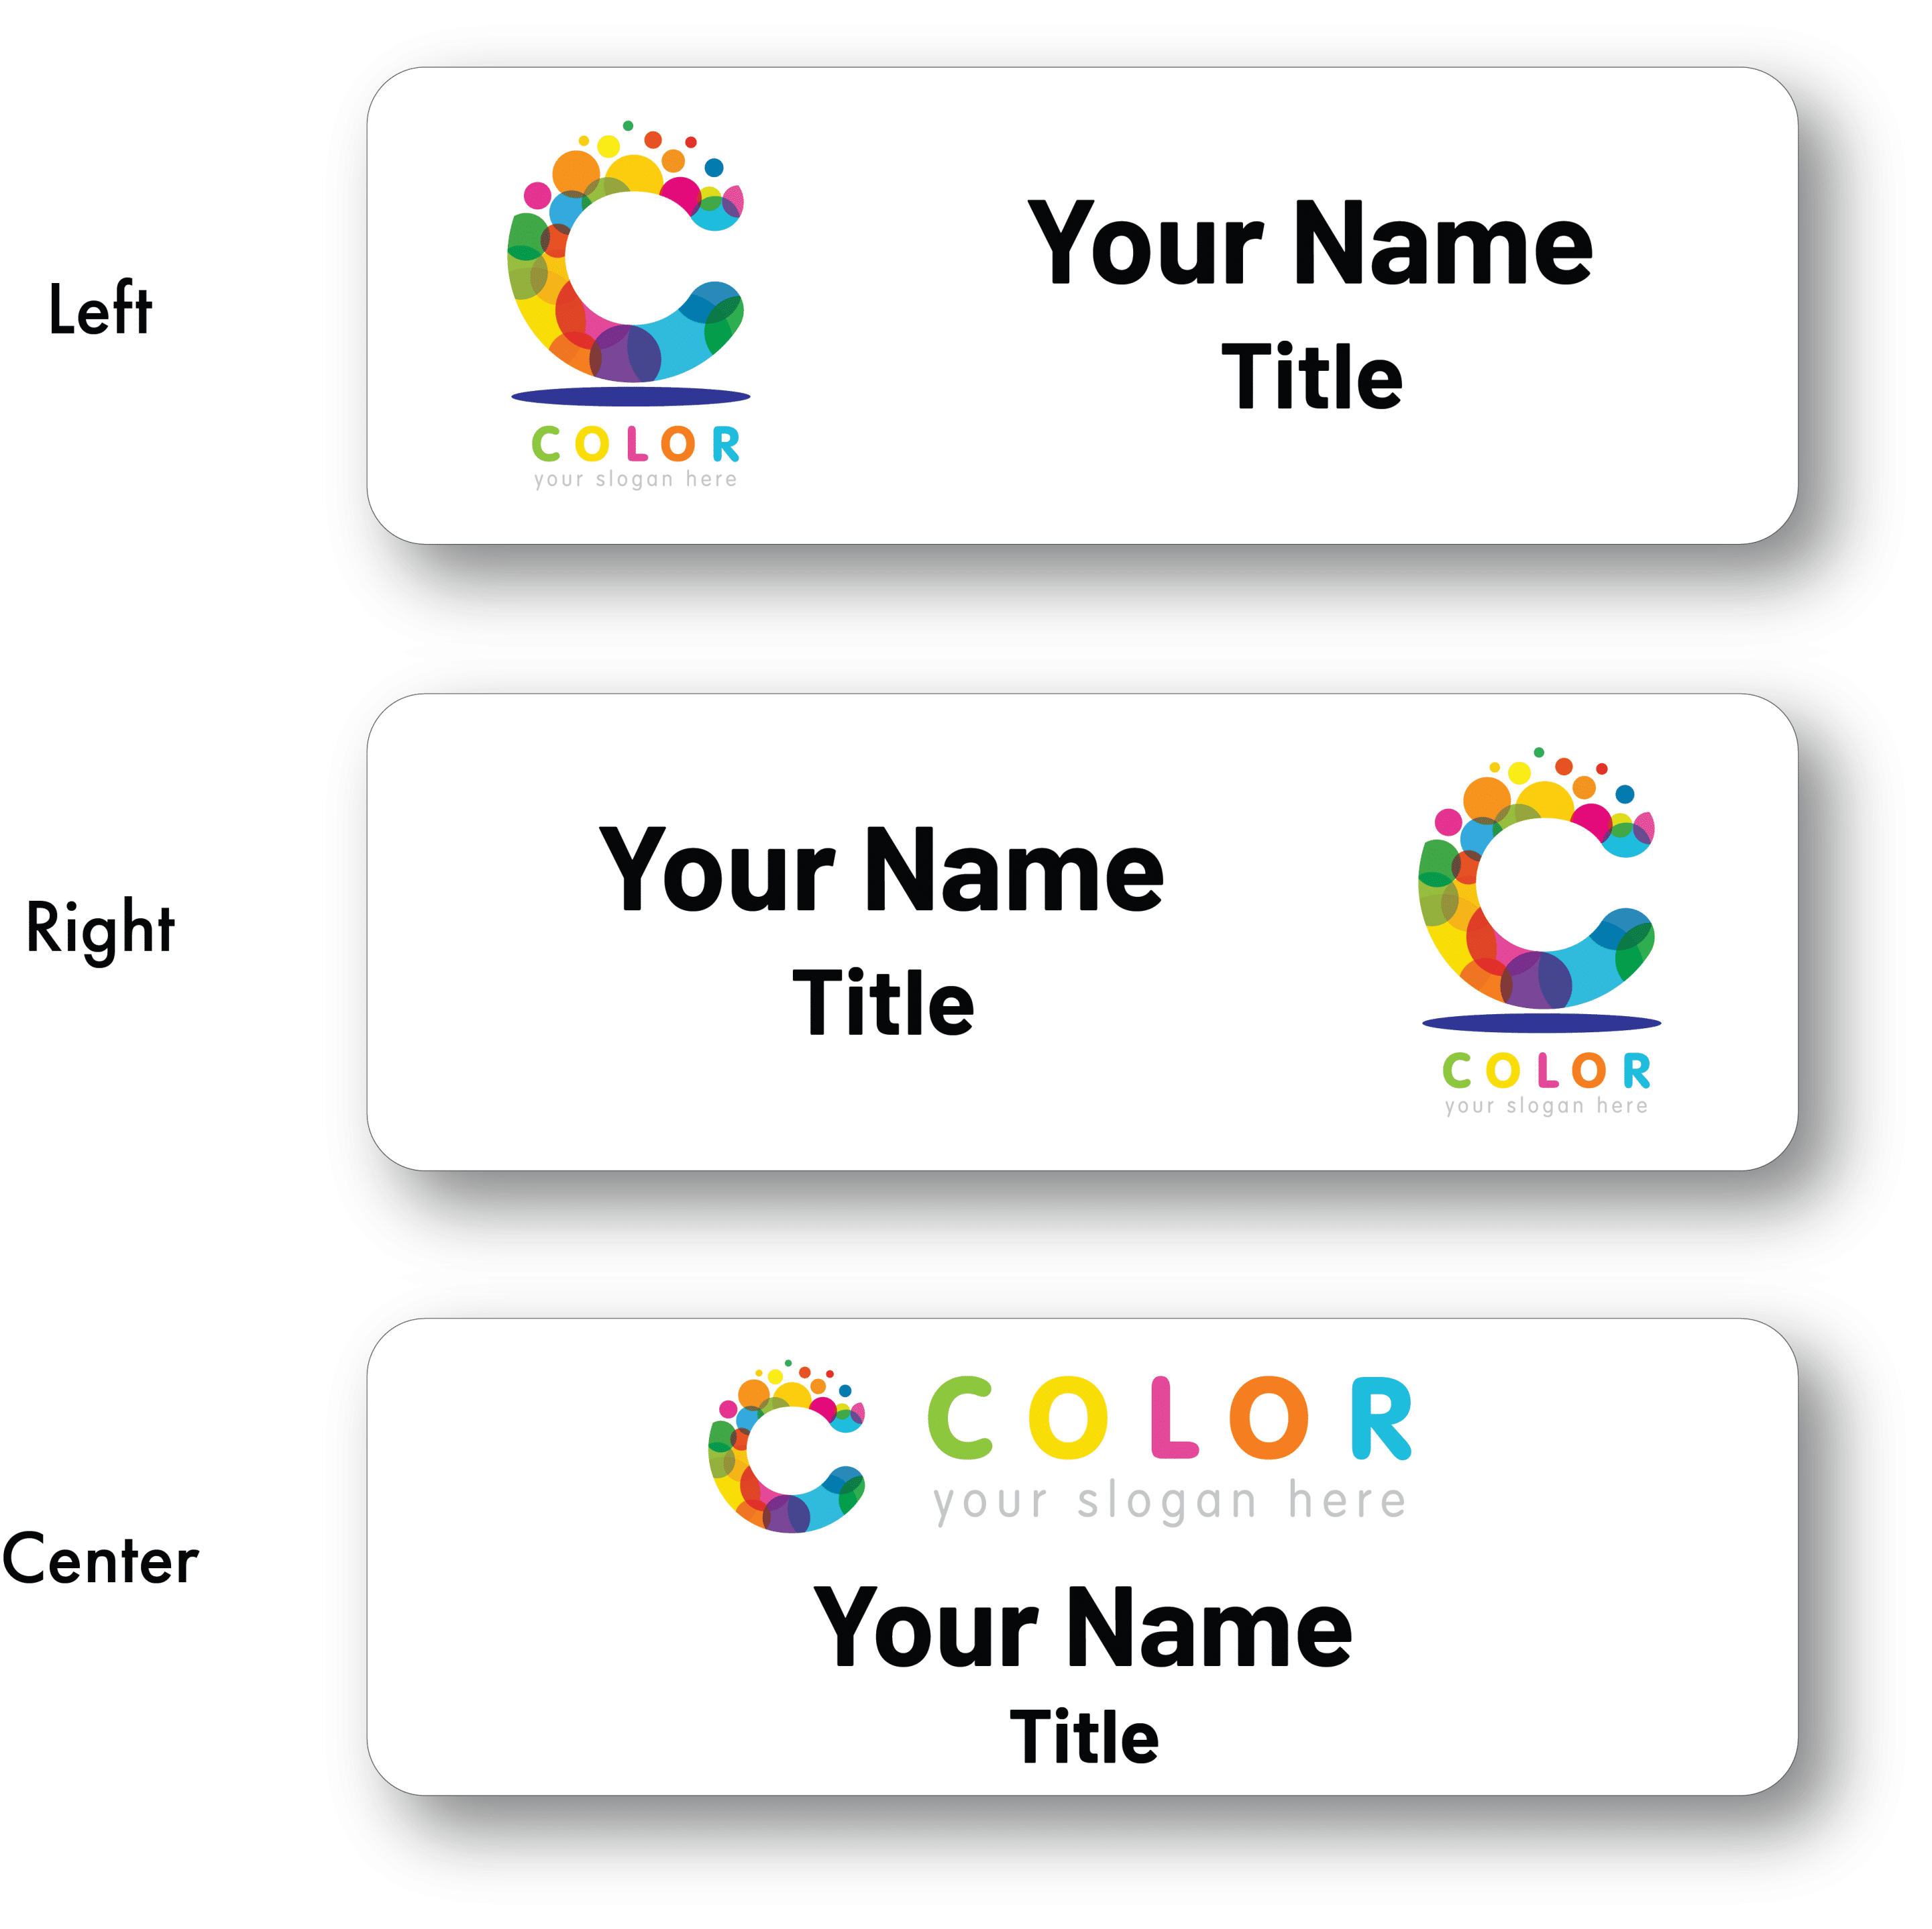 Heres a quick tutorial on how to sublimate the name tag acrylic